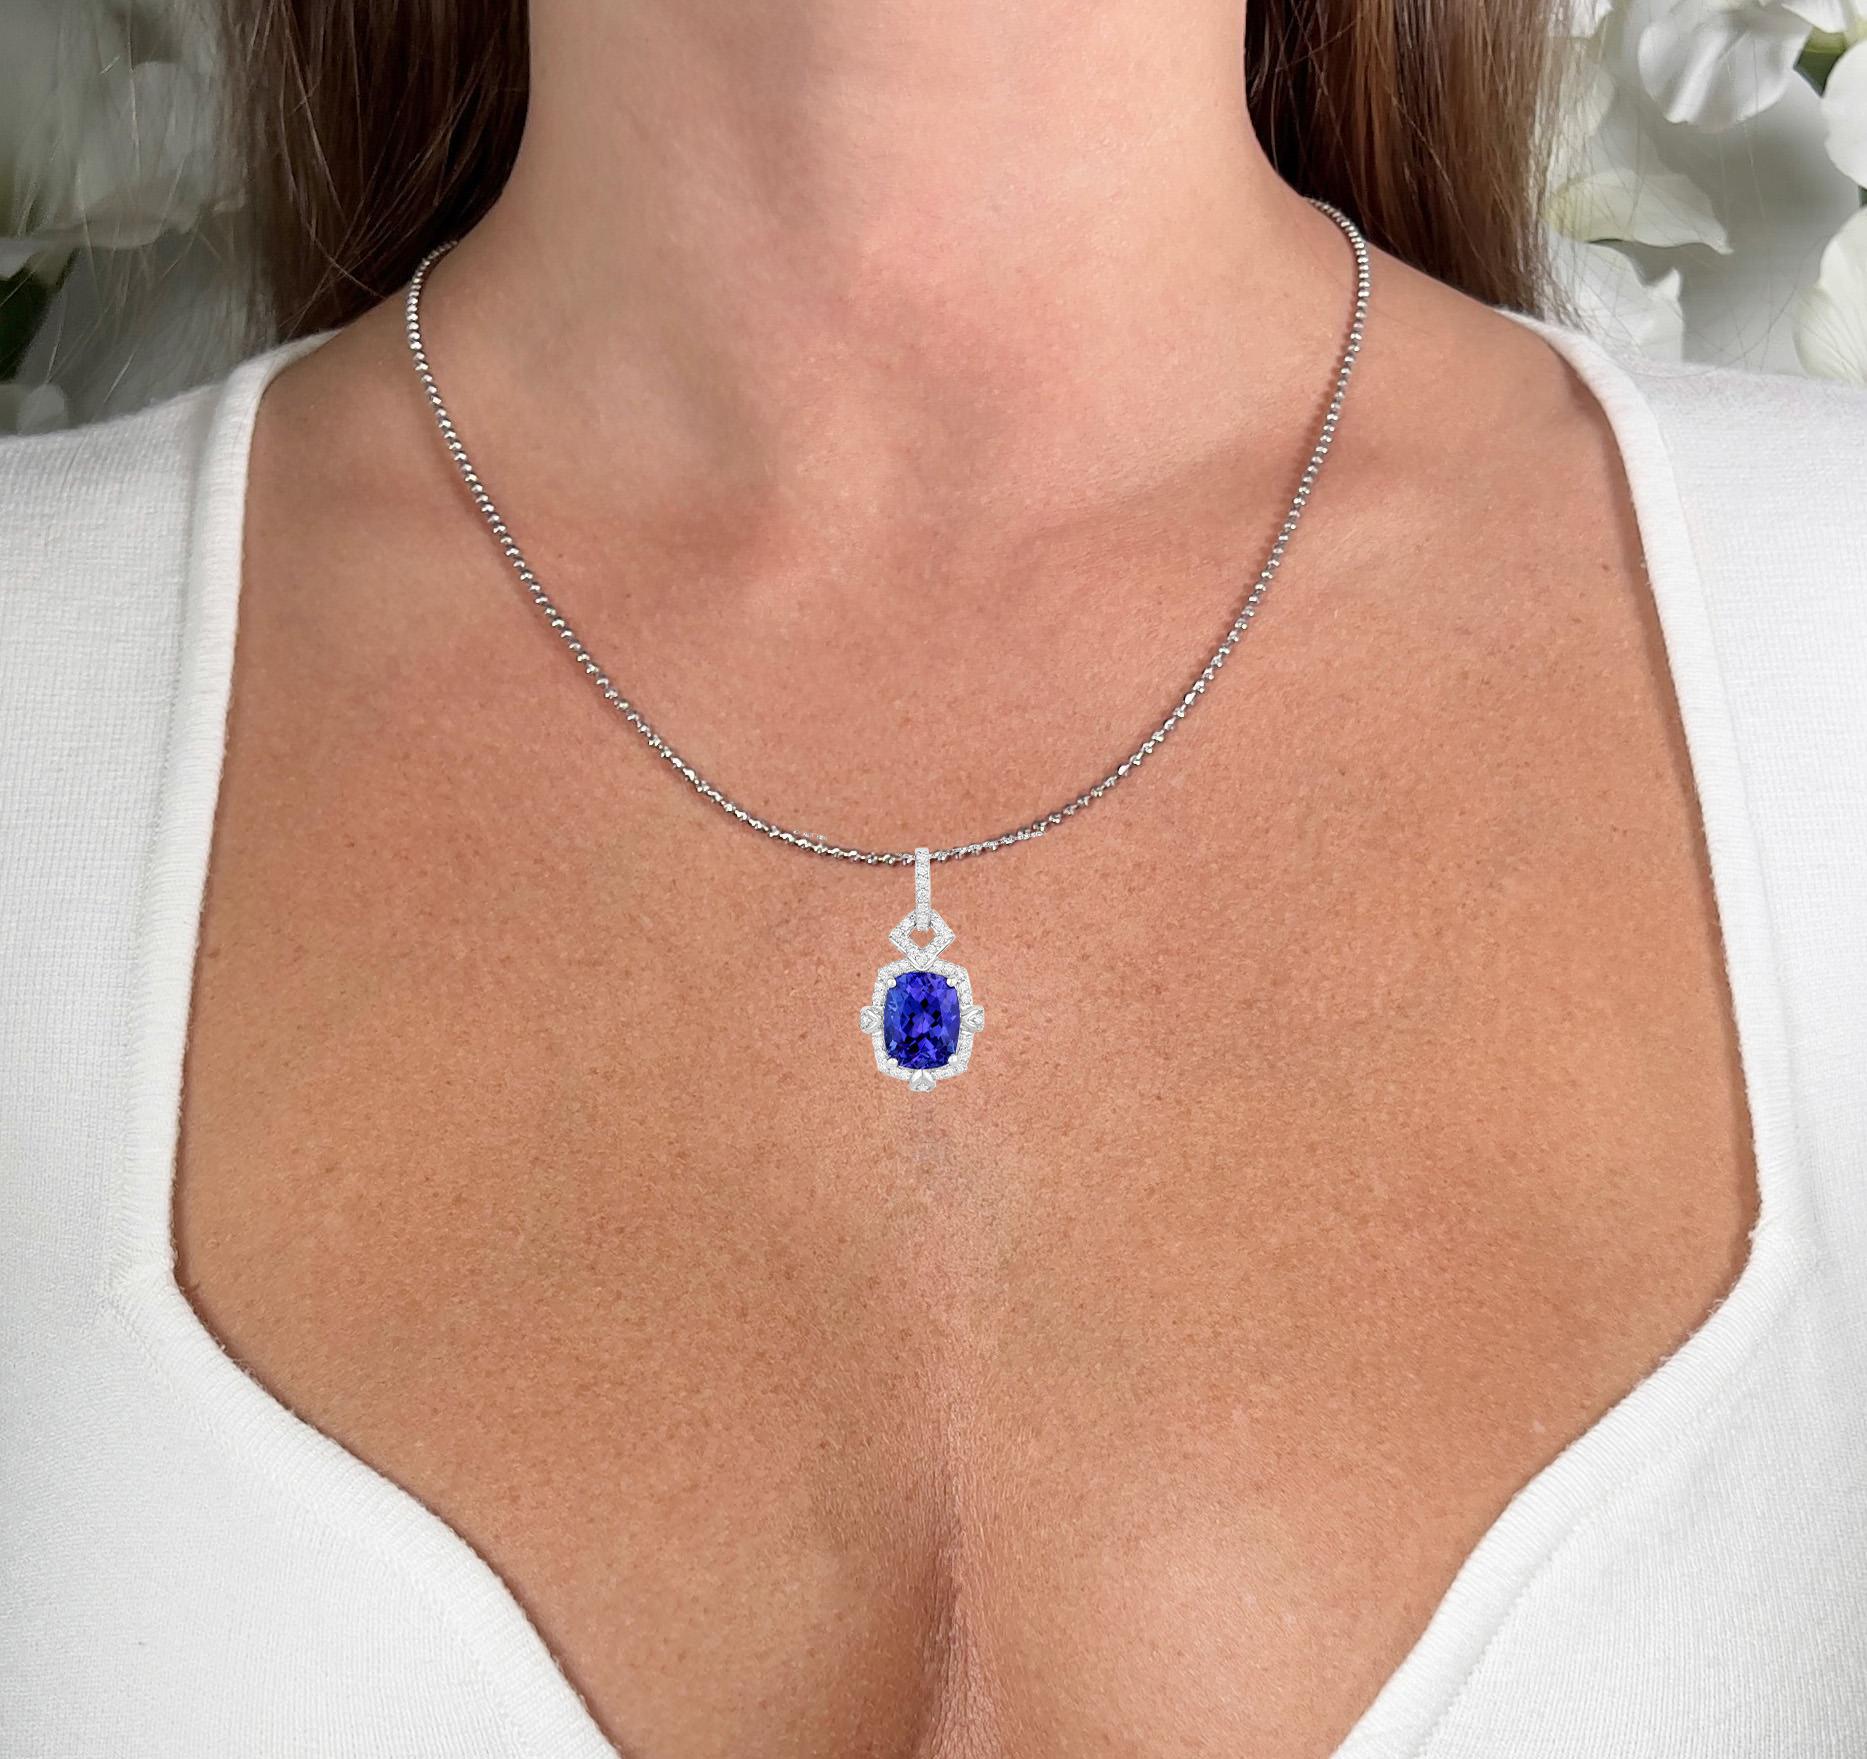 It comes with the Gemological Appraisal by GIA GG/AJP
All Gemstones are Natural
Radiant Tanzanite = 2.53 Carat
39 Round Diamonds = 0.21 Carats
Metal: 14K White Gold
Pendant Dimensions: 23 x 12 mm
